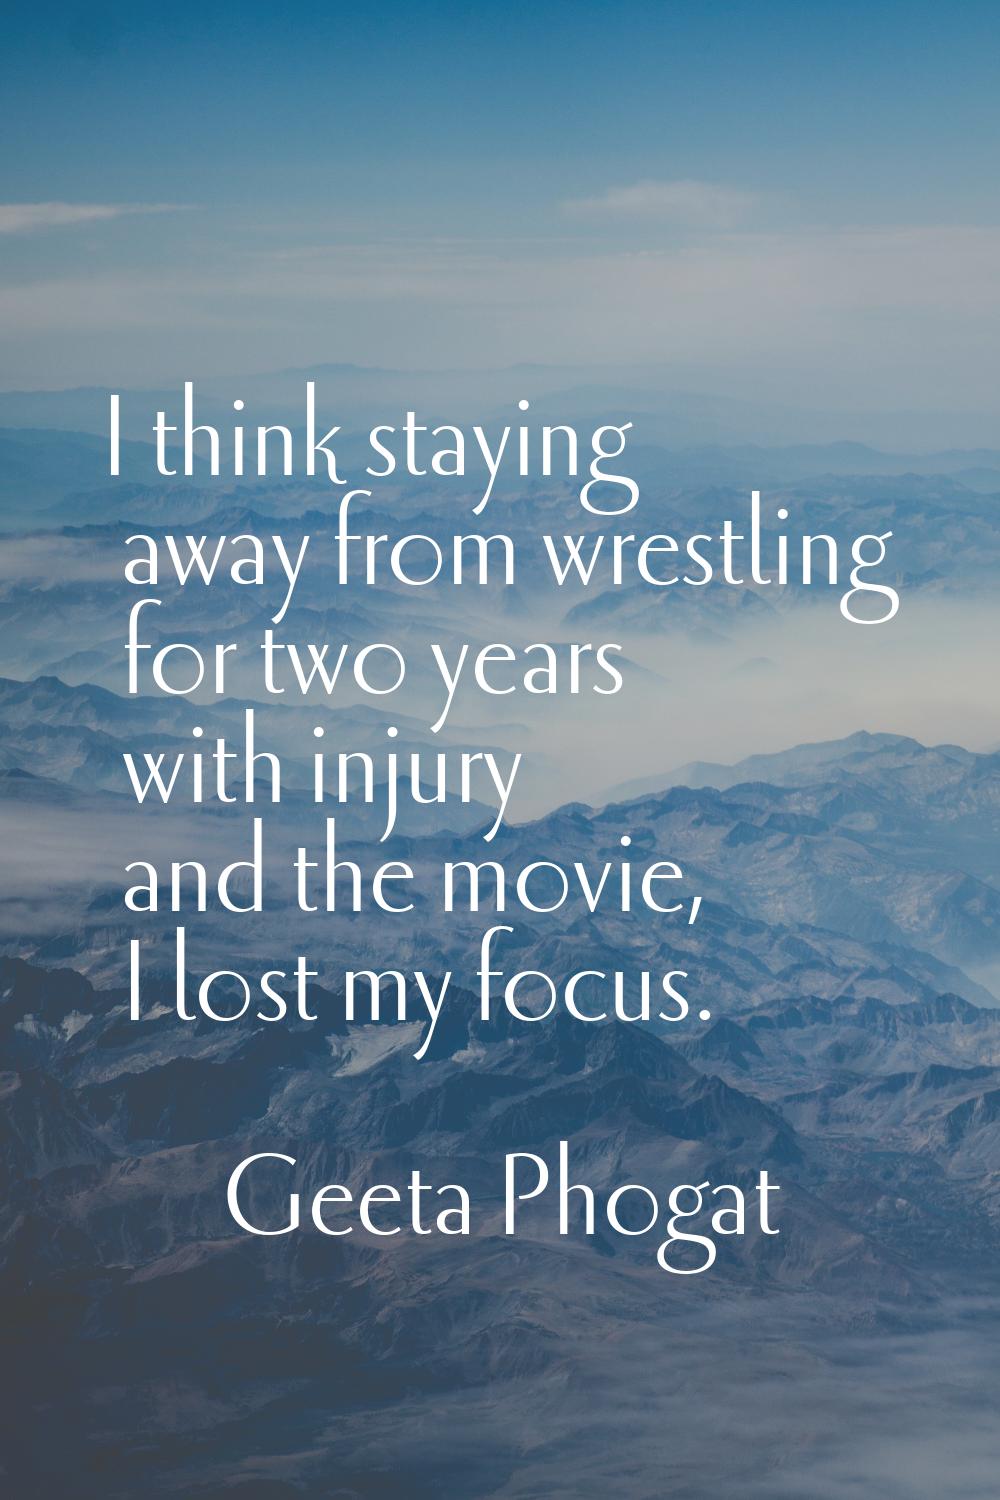 I think staying away from wrestling for two years with injury and the movie, I lost my focus.